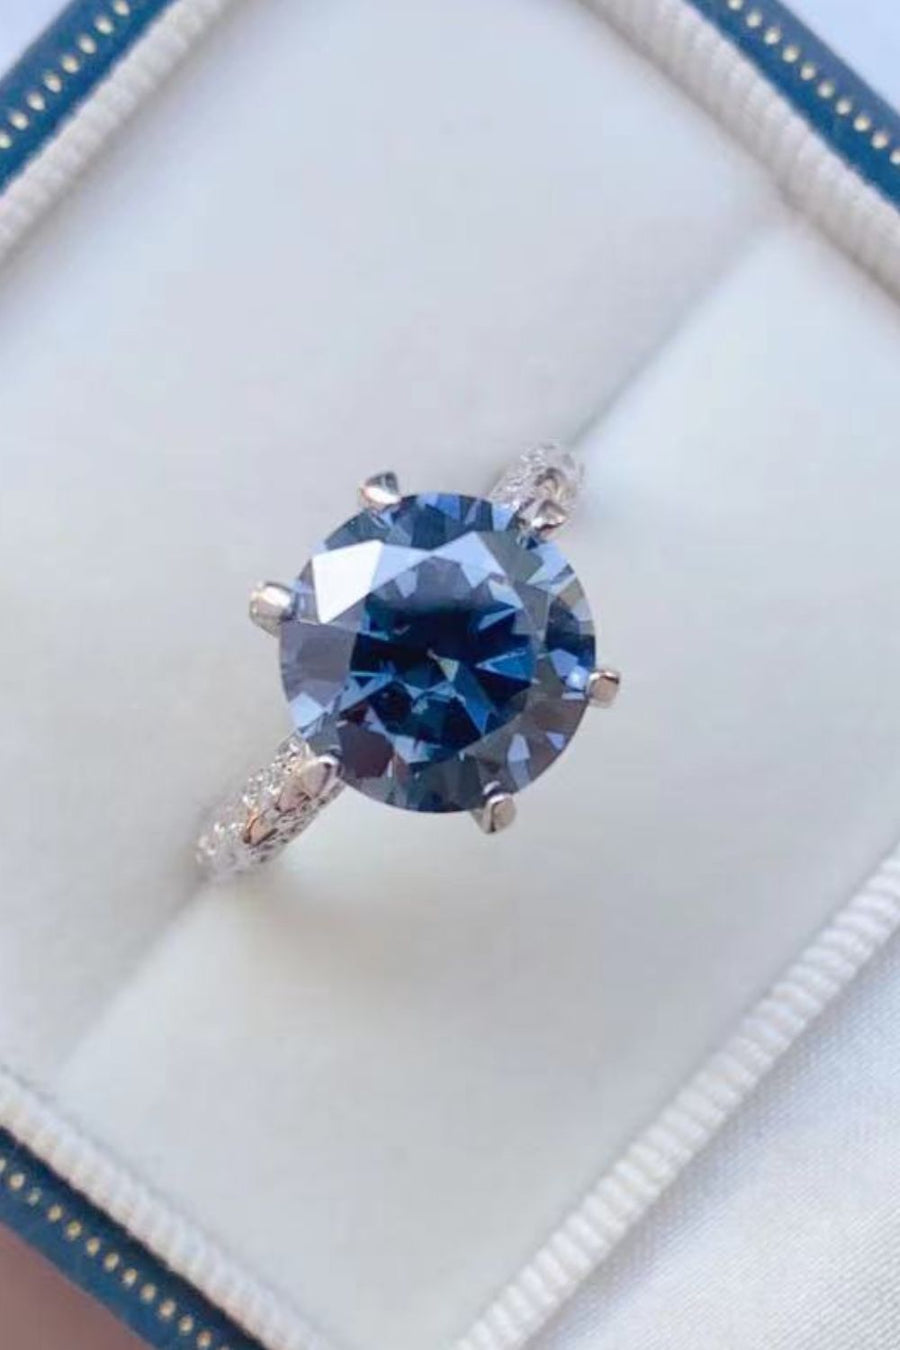 Moissanite ring, Sterling silver jewelry, Lab-created gemstone, 5-carat statement piece, Sparkling centerpiece, Affordable luxury ring, Elegant sterling silver band, High-quality craftsmanship, Timeless beauty, Fine jewelry accessory.